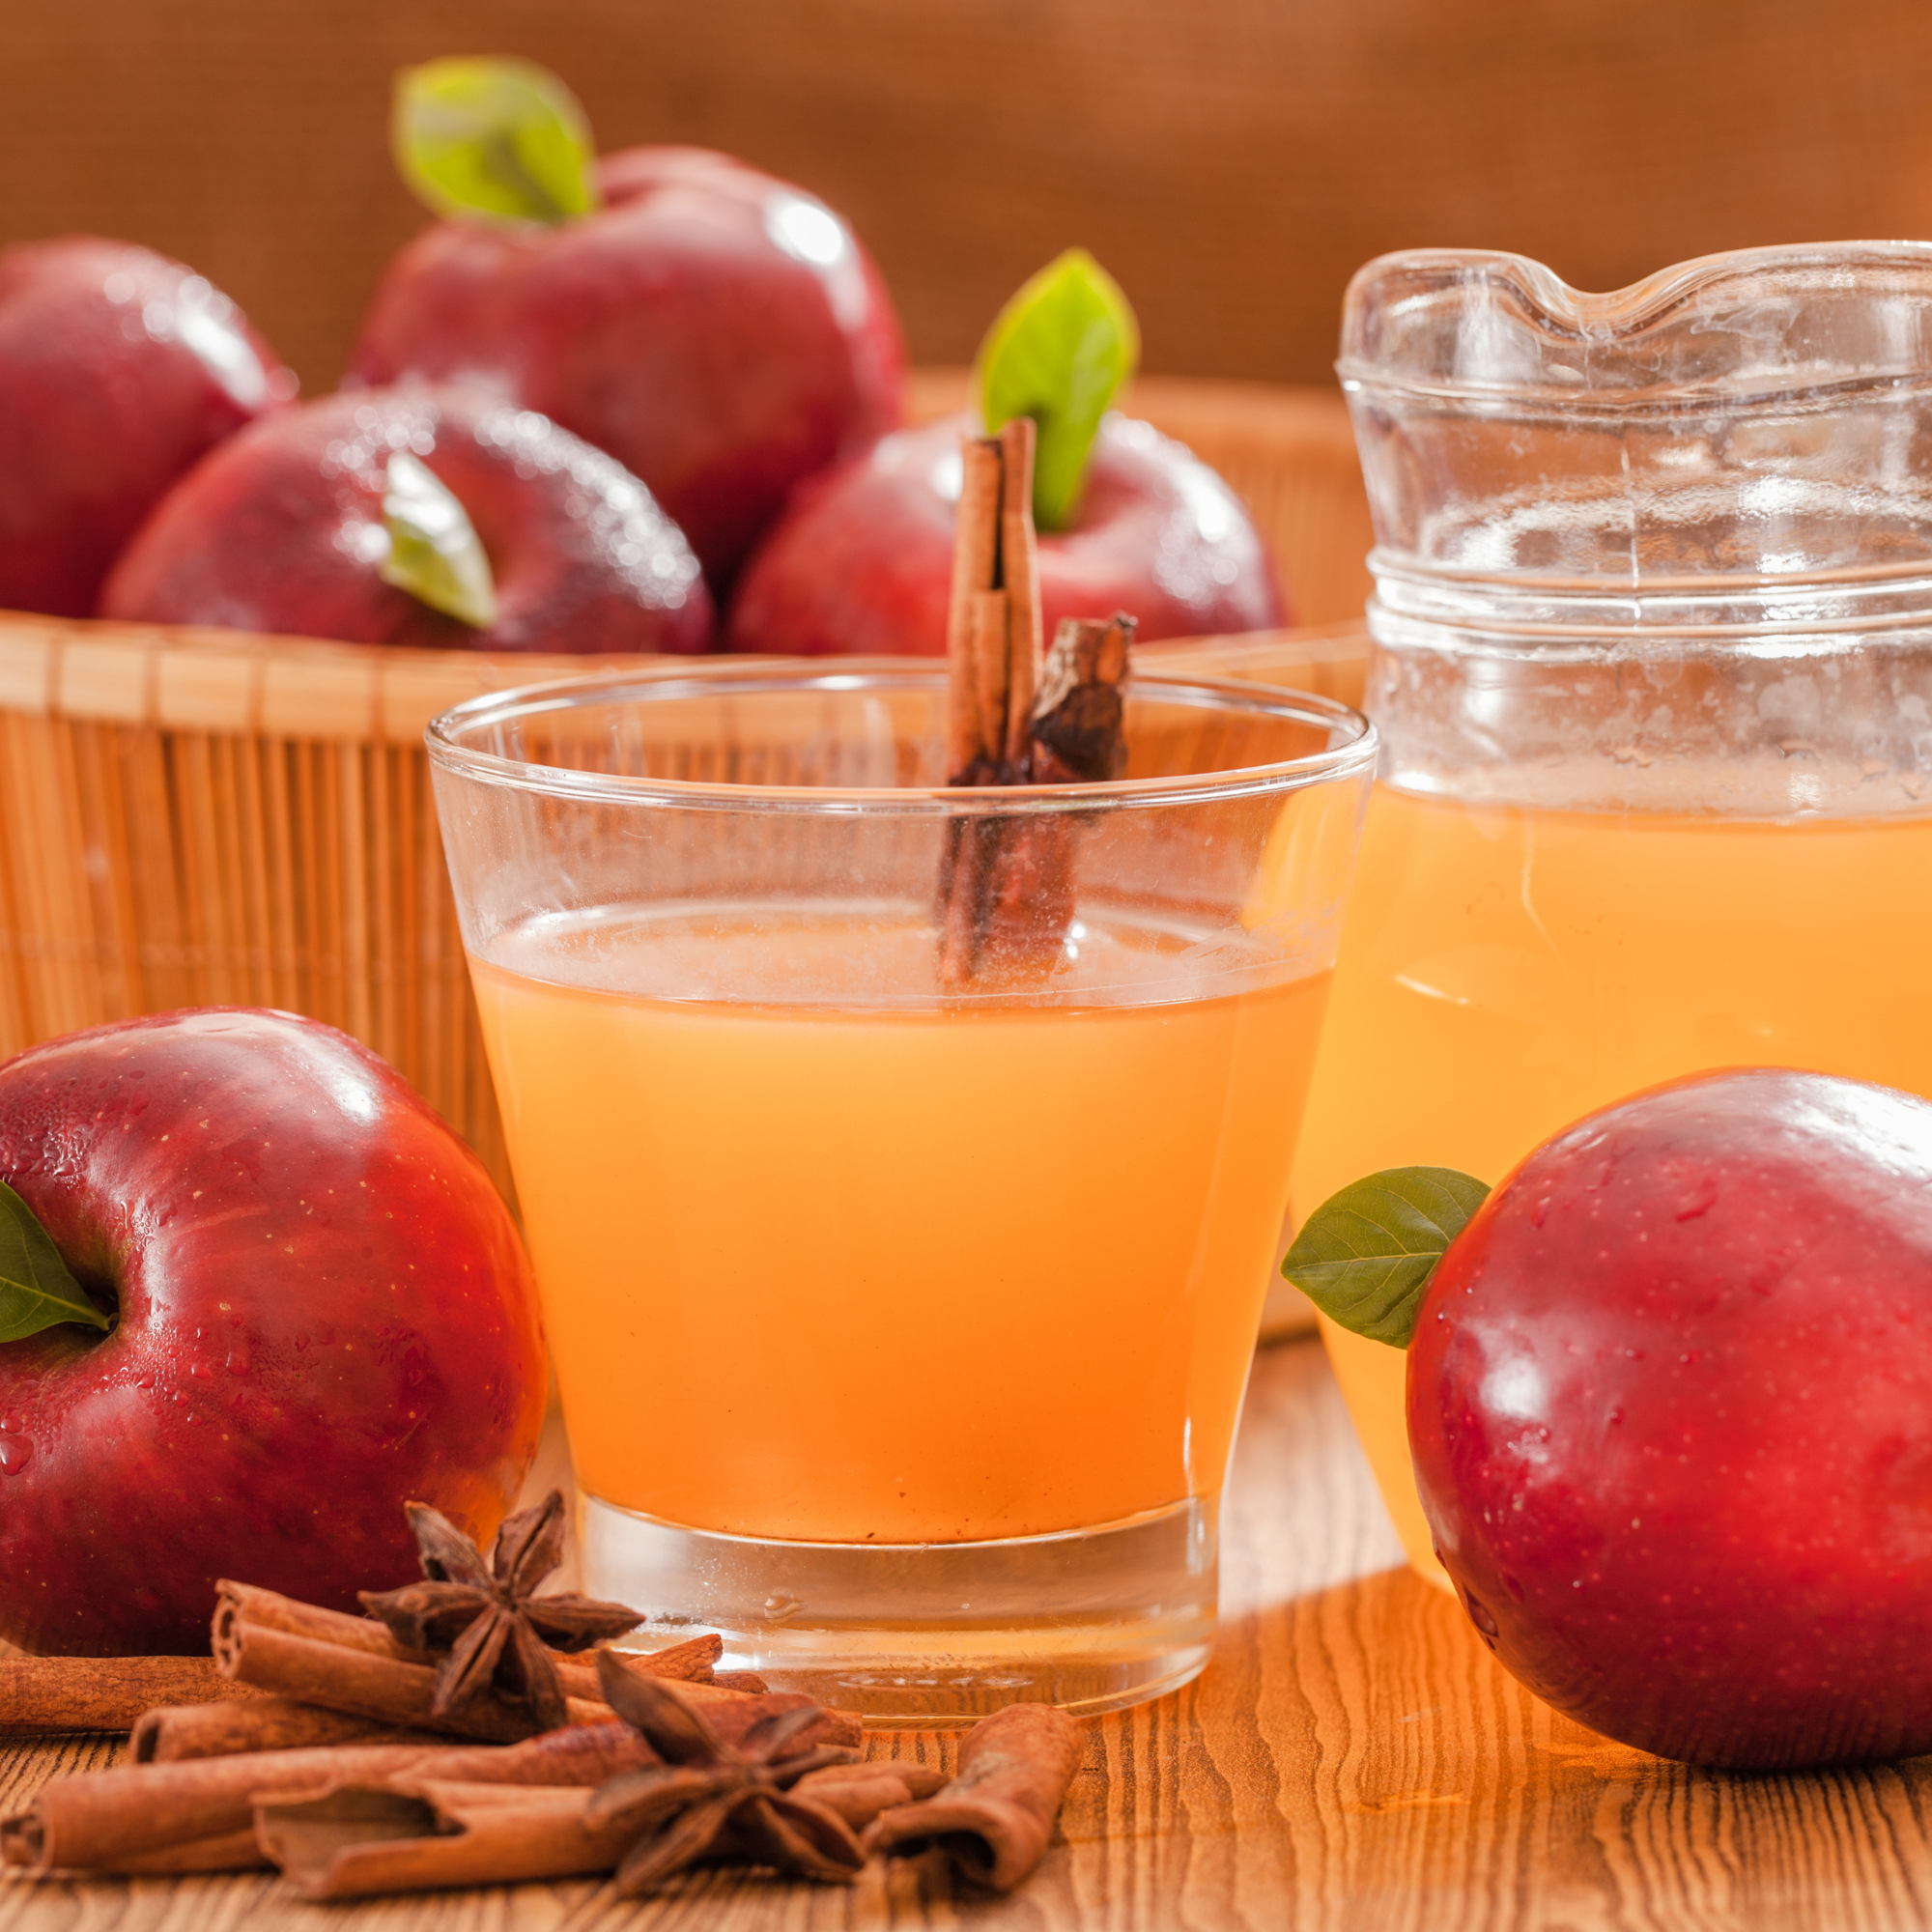 How does Apple Cider Vinegar help Low Stomach Acid and Promote Better Digestion?